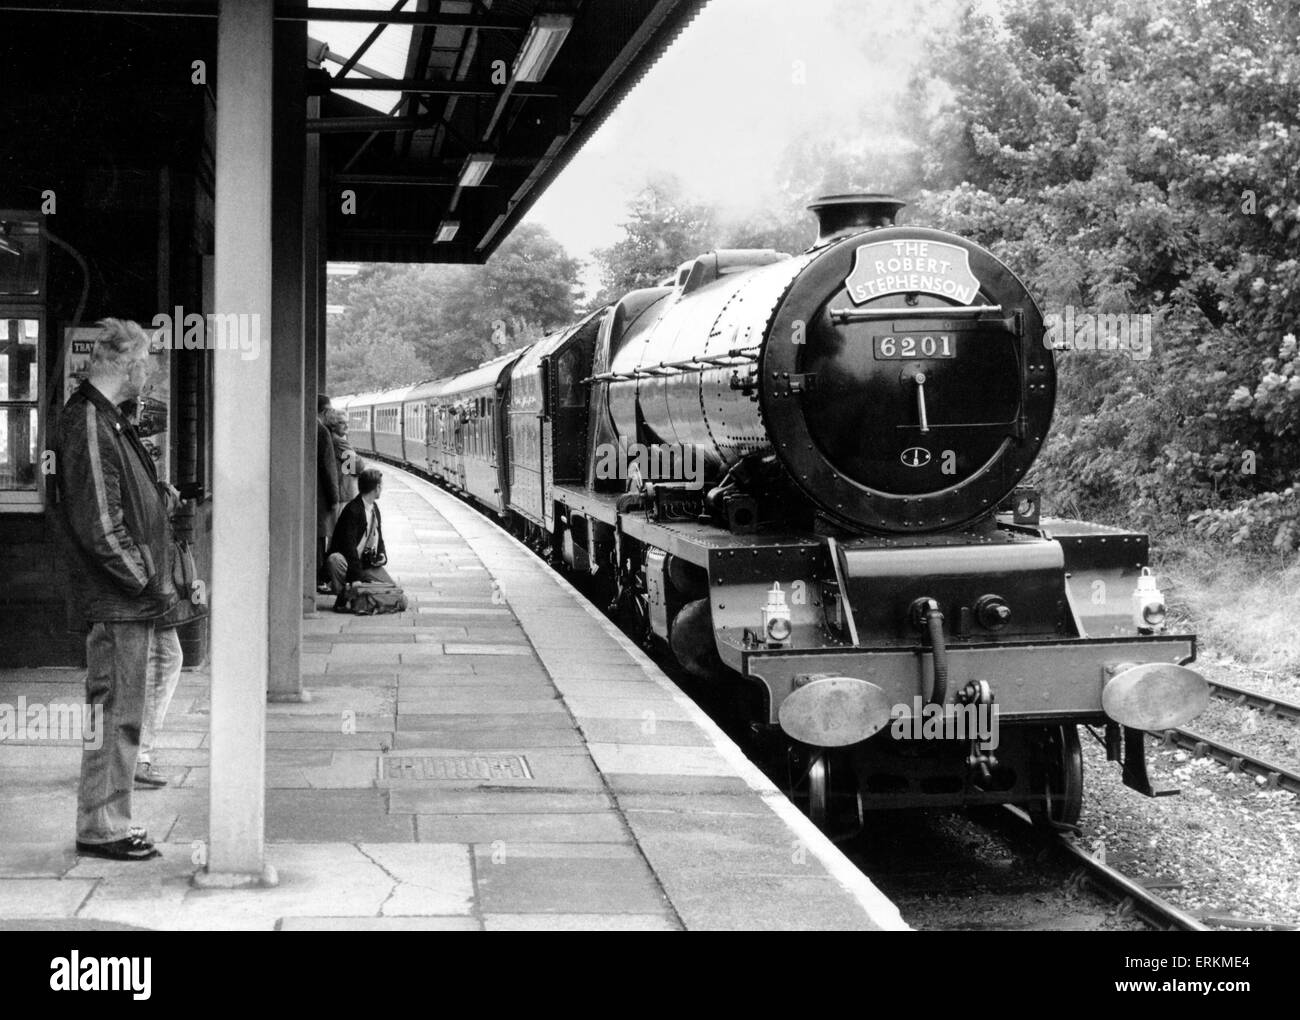 The London Midland and Scottish Railway (LMS) Princess Royal Class No. 6201 Pacific steam locomotive arrives at Dorridge Station at the front of a Euston to Birmingham 150th anniversary special. 17th September 1988. Stock Photo